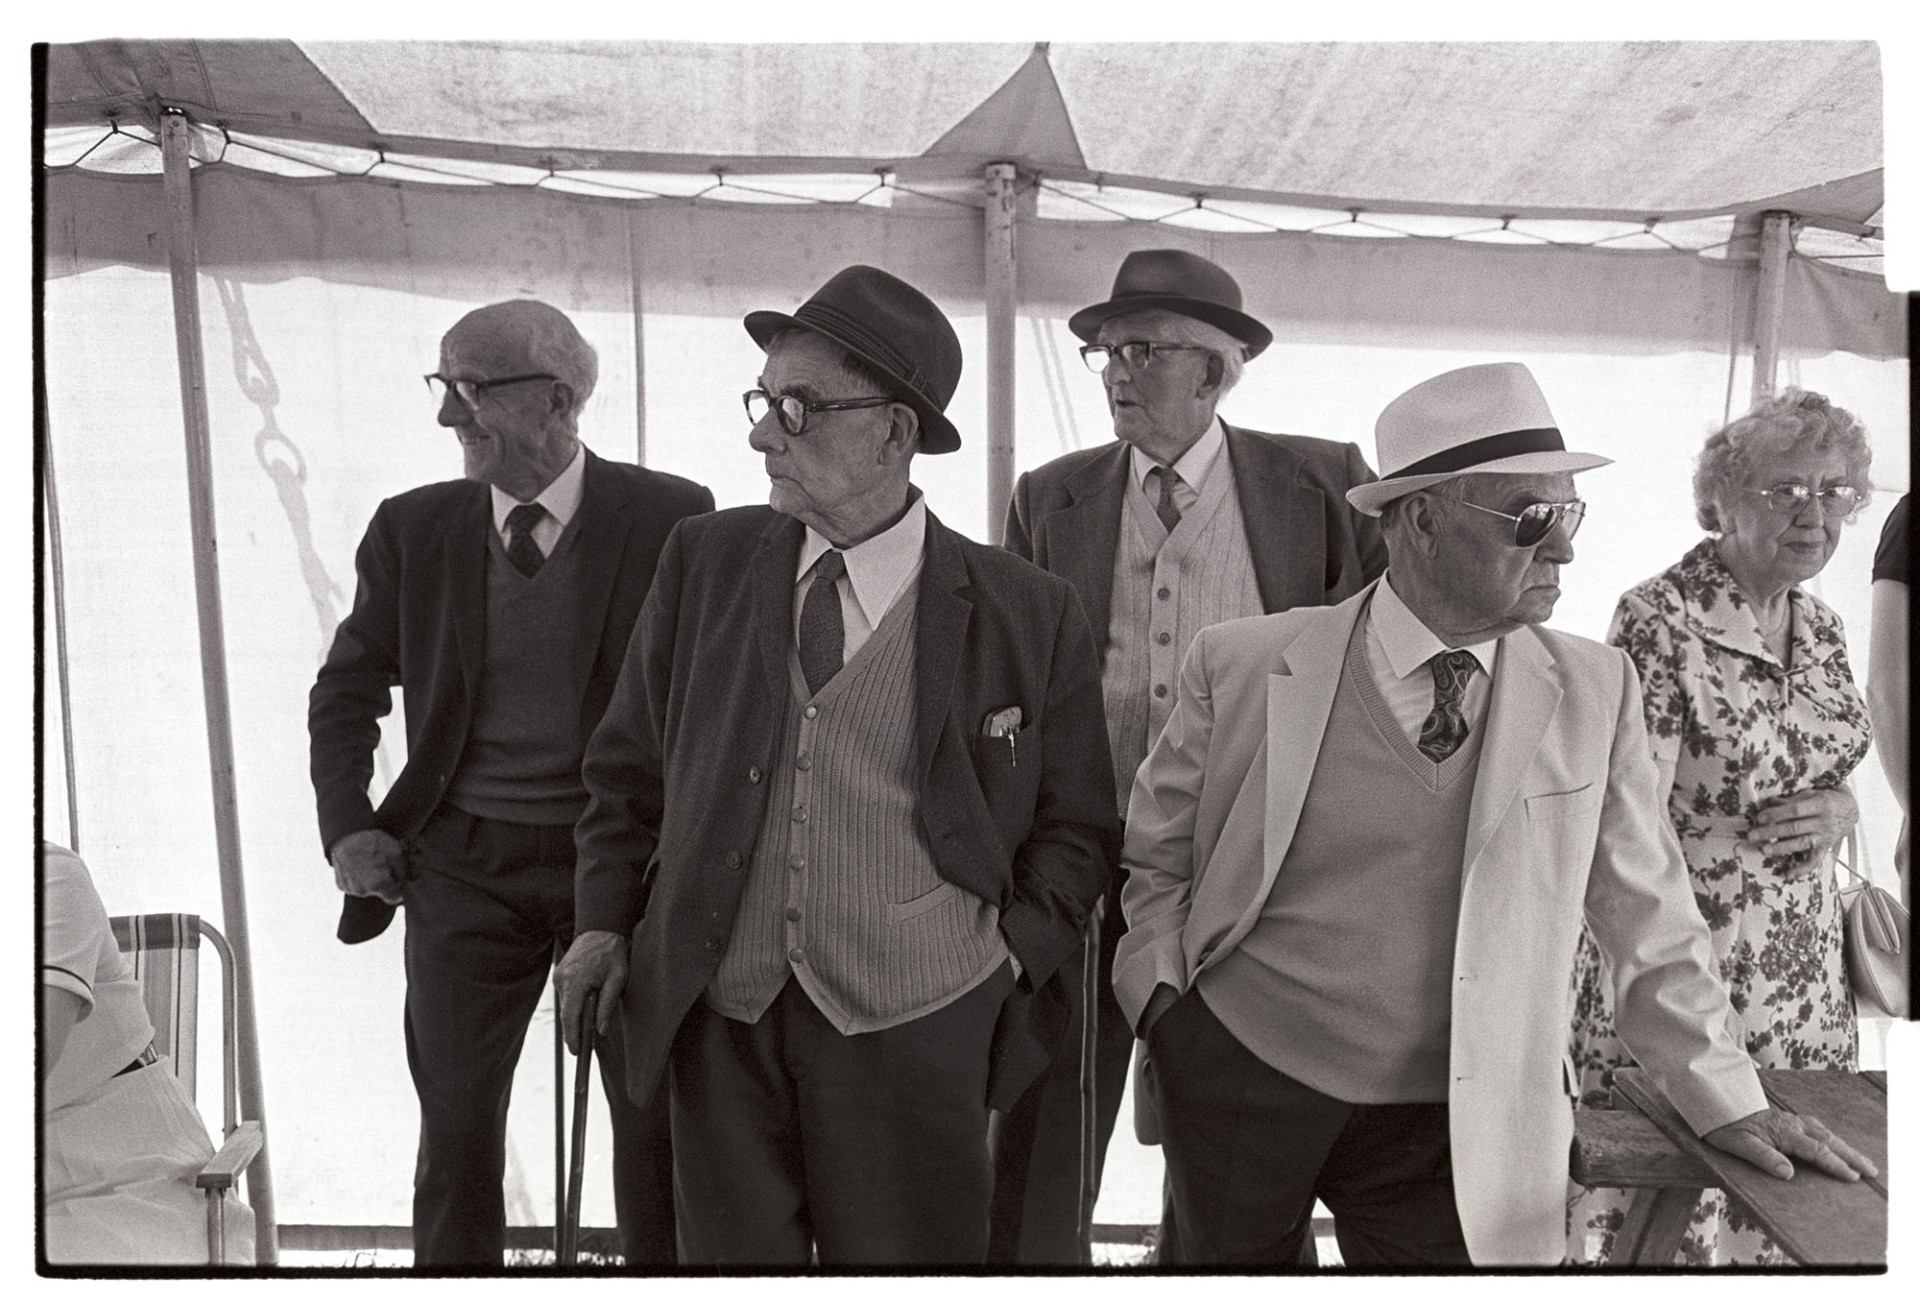 Fete, spectators in tent, hats. 
[Four men and a woman in a tent or marquee at Marwood Village Fete. Three of the men are wearing hats.]